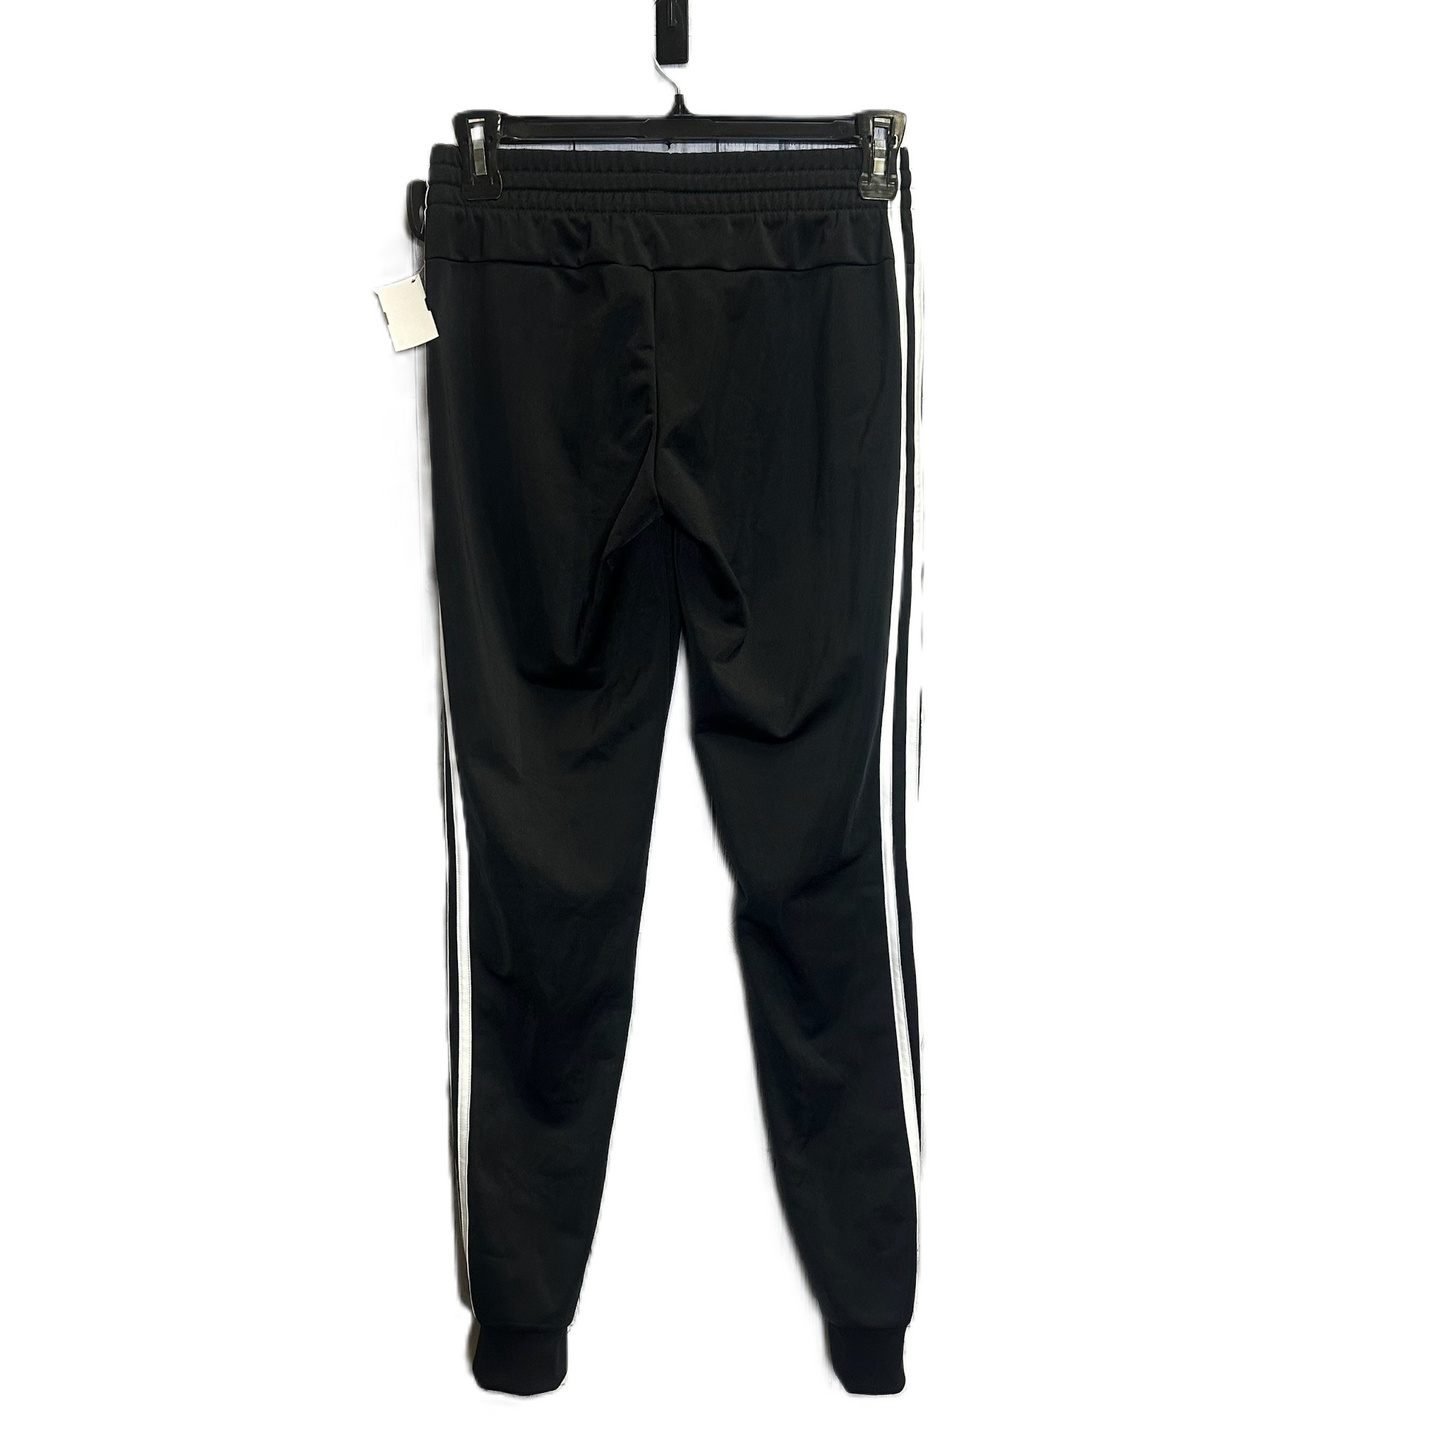 Black Athletic Pants By Adidas, Size: S